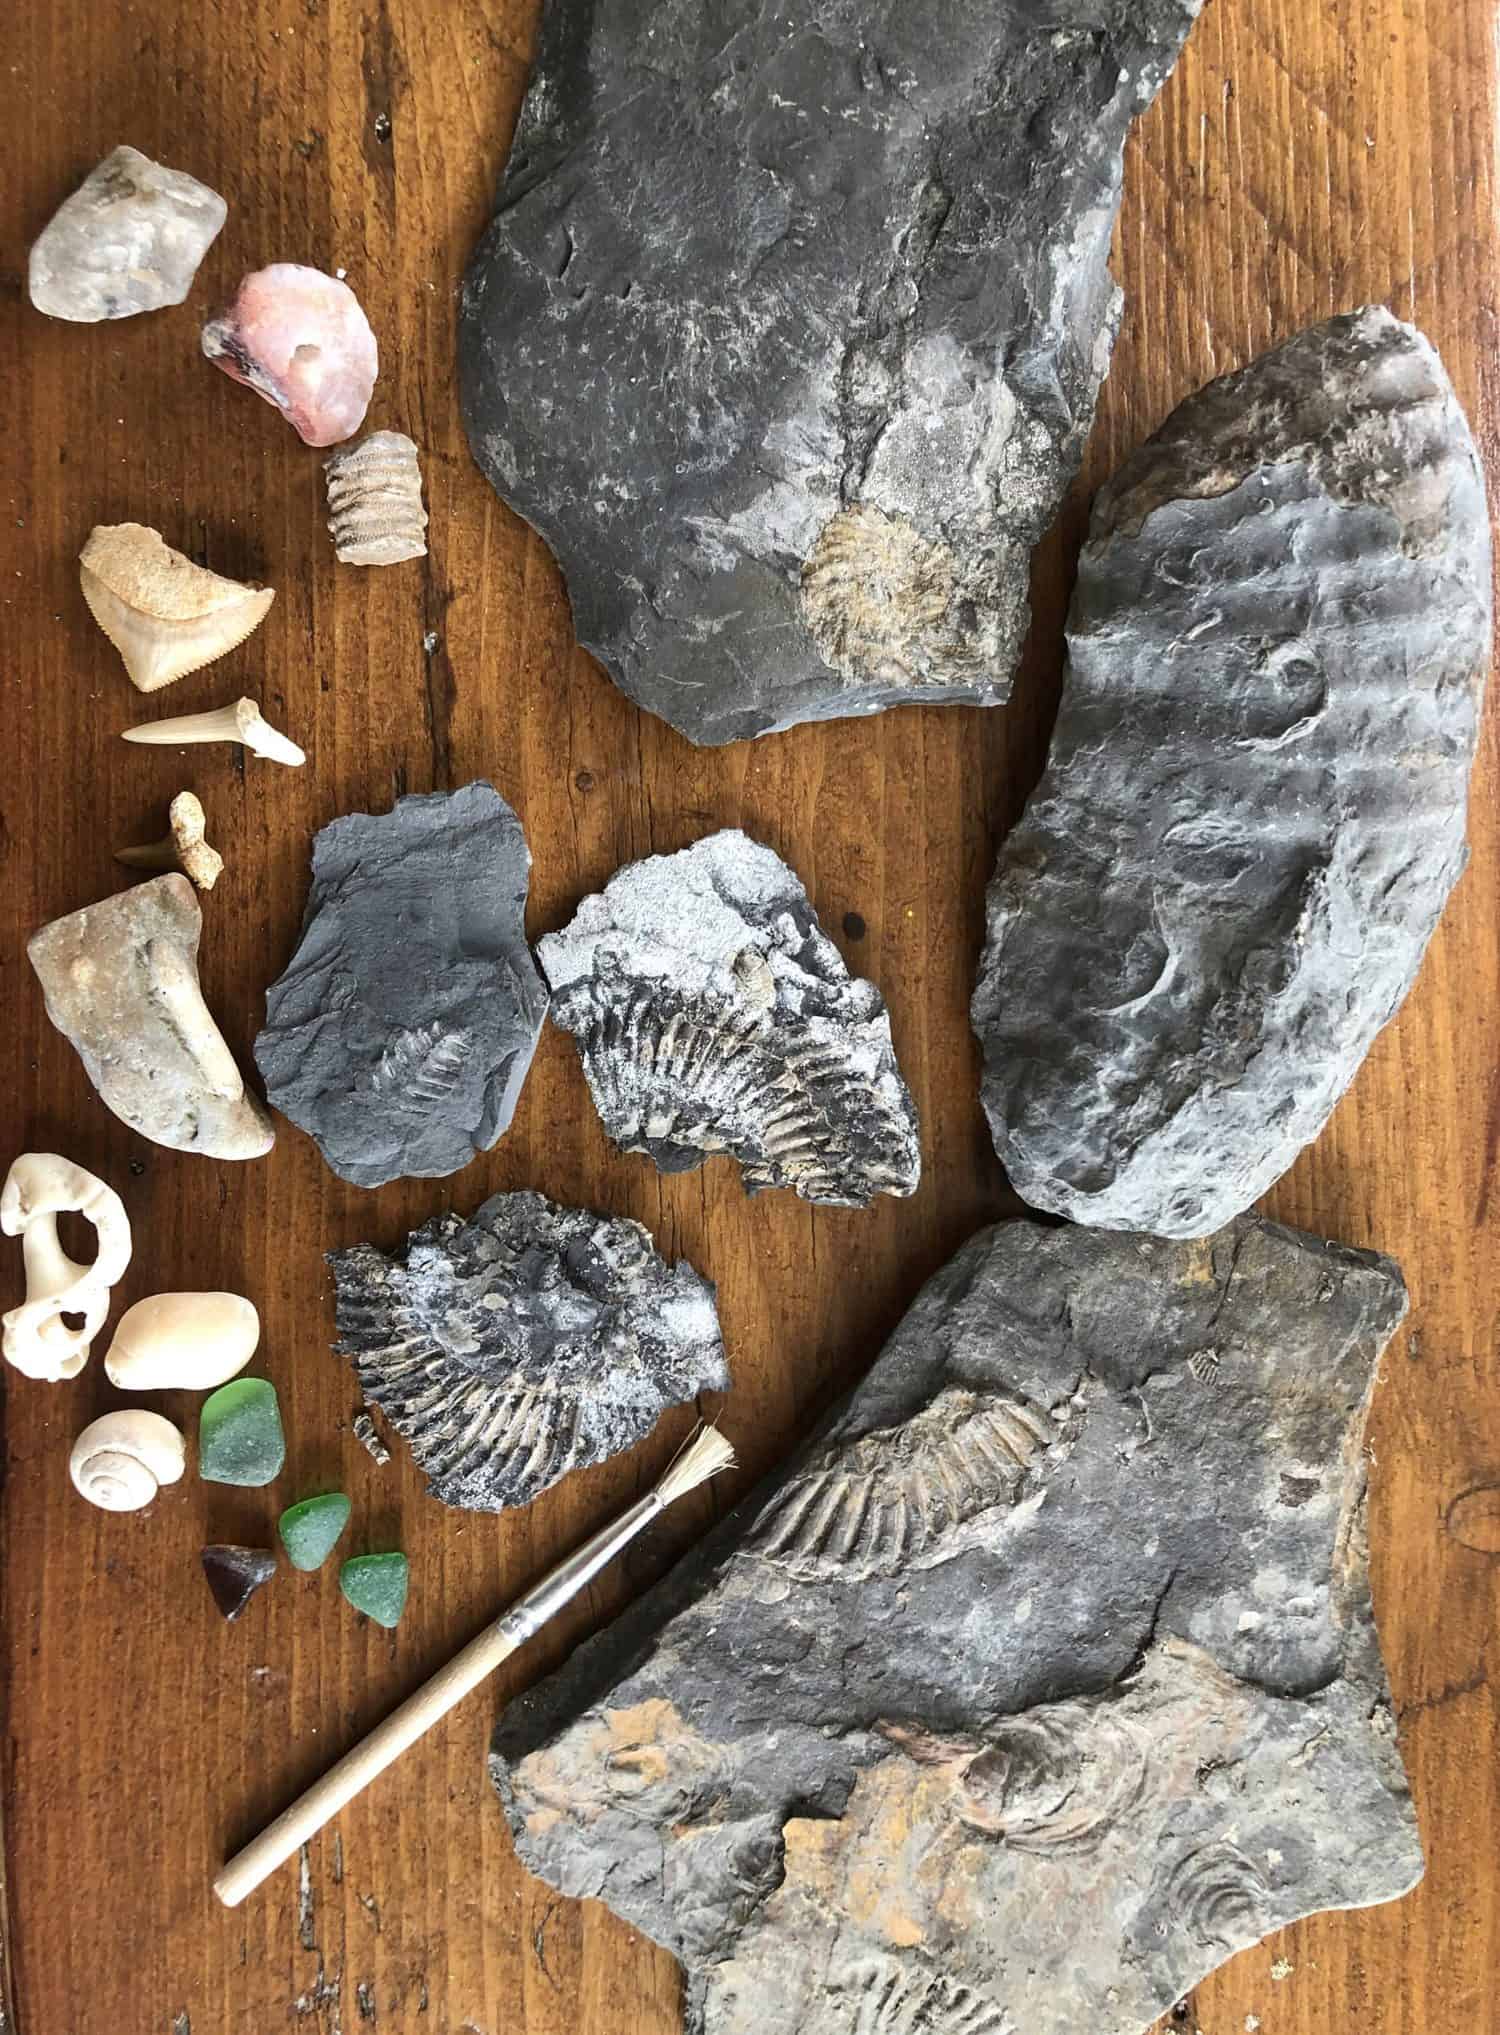 Fossils we collected on day out fossil hunting